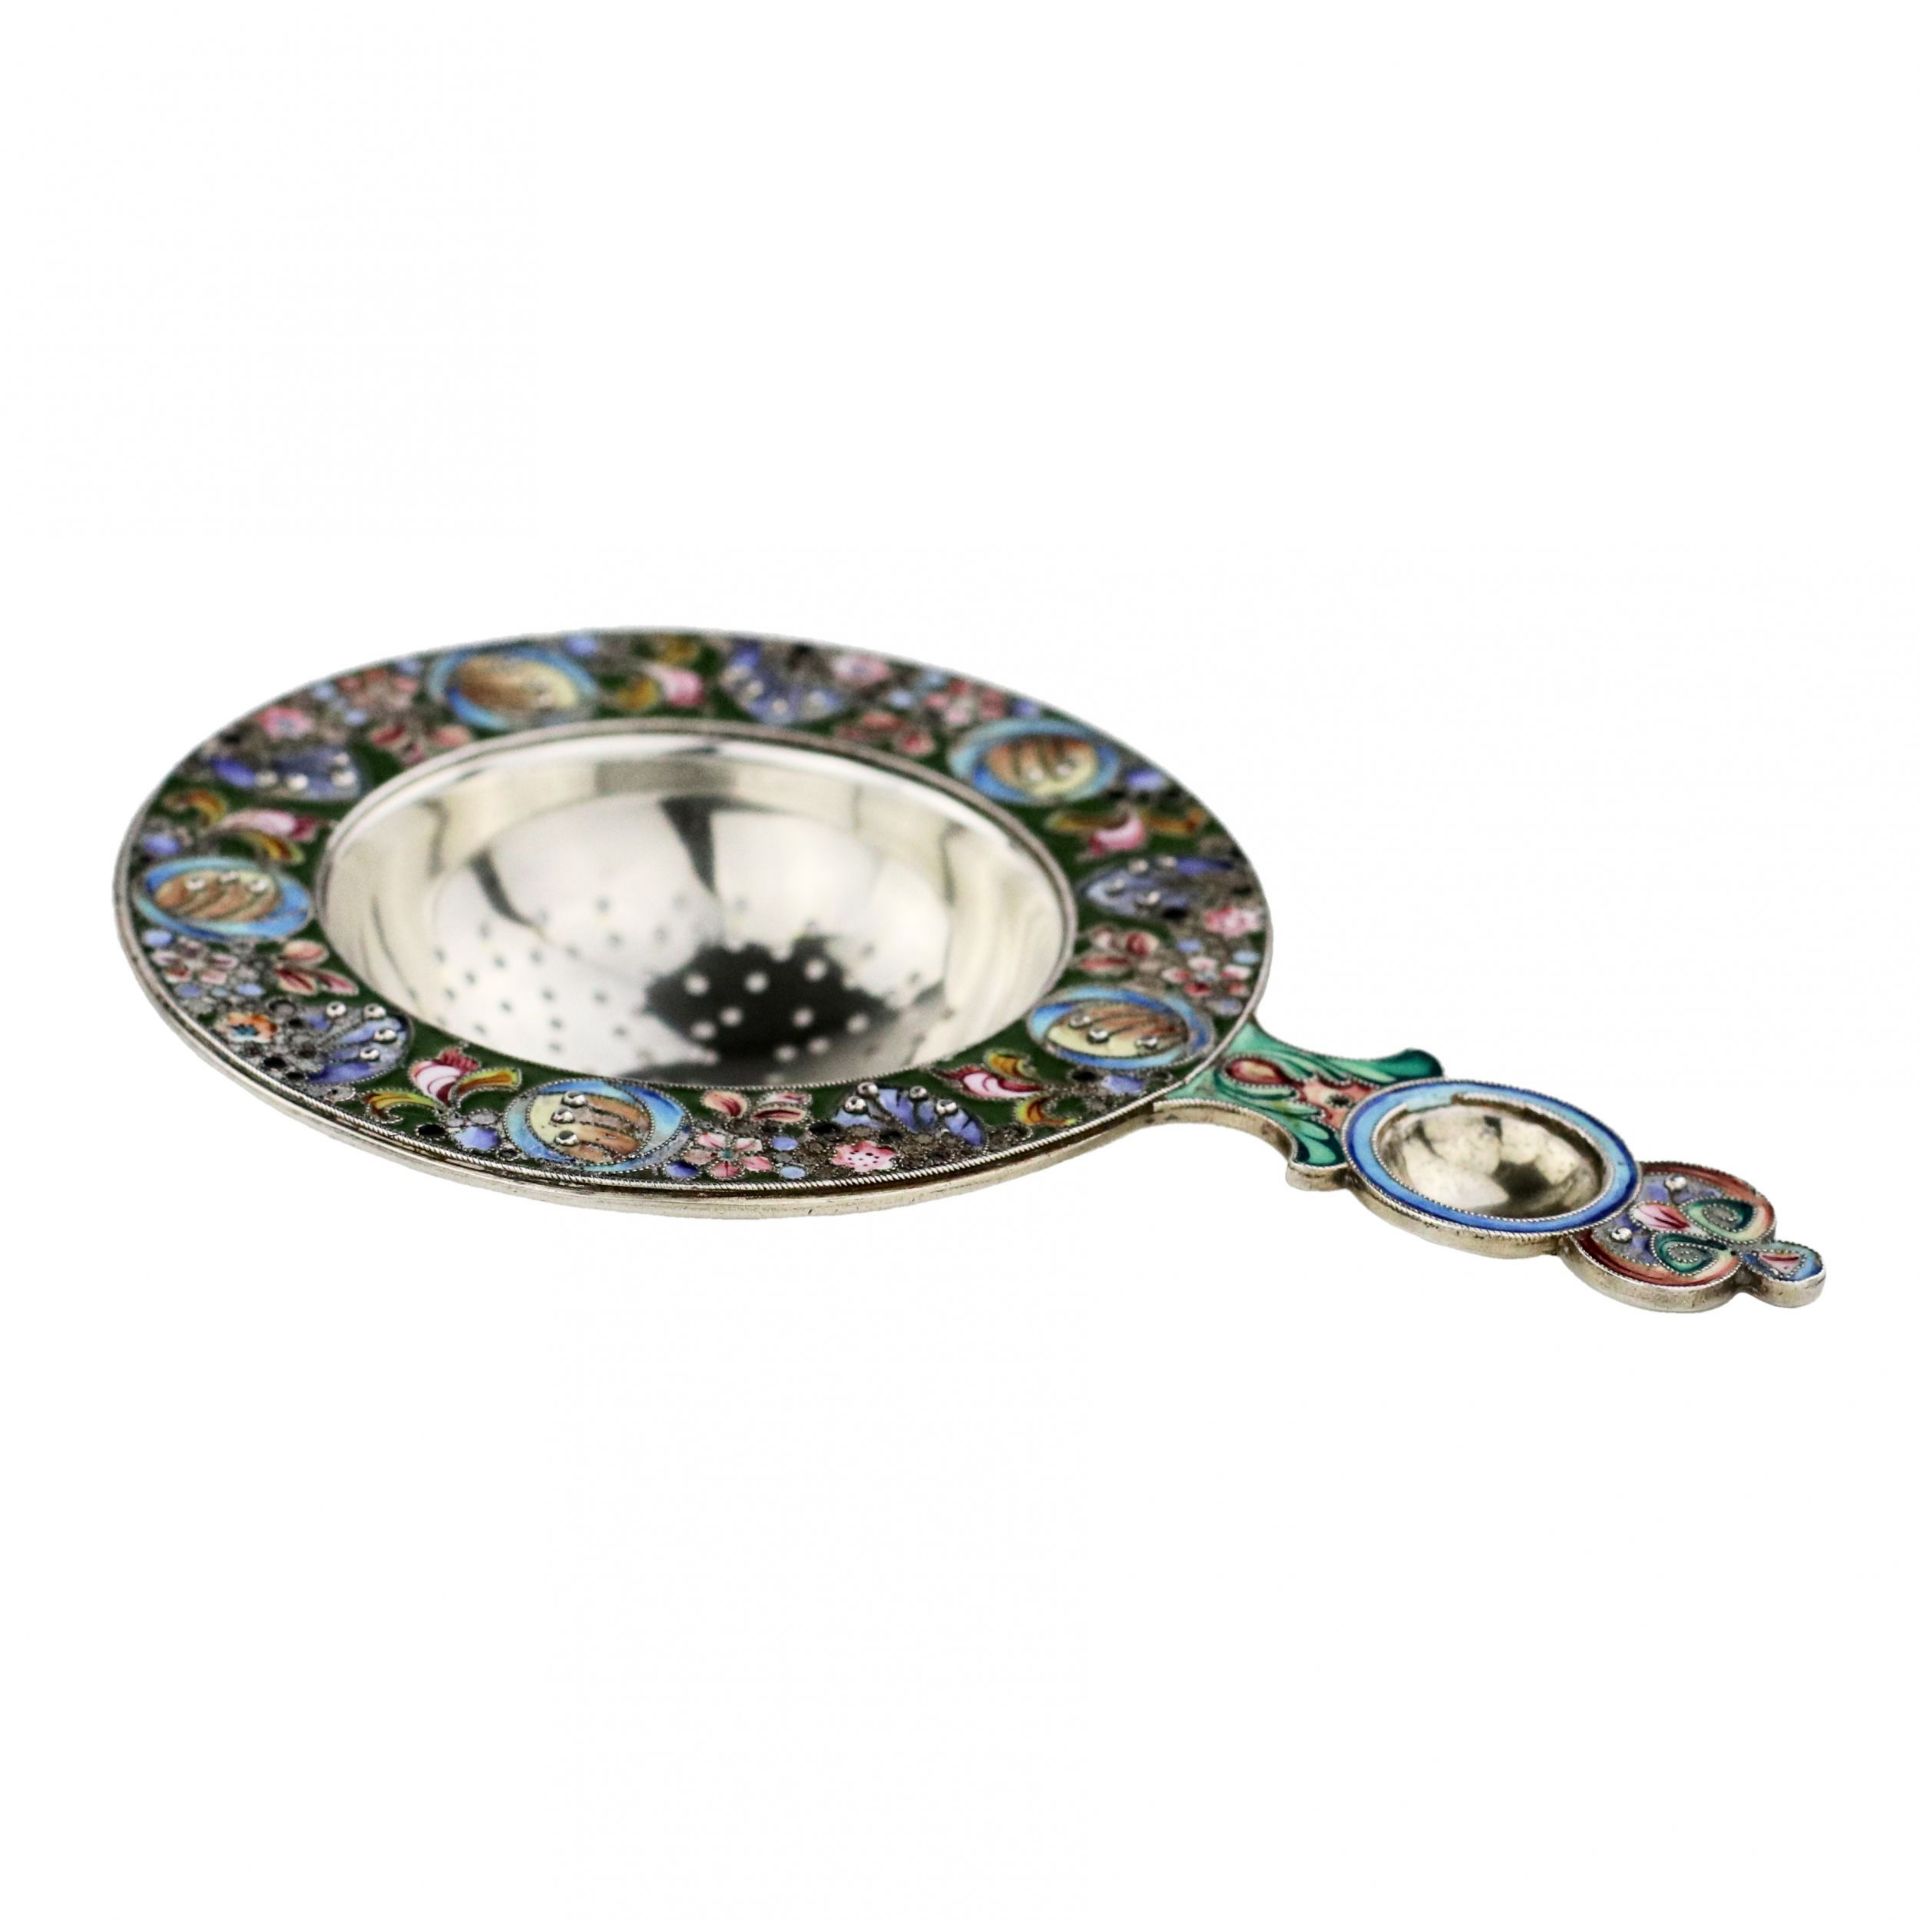 Russian silver tea strainer, with enamel decor, in the spirit of Russian Art Nouveau. - Image 4 of 7